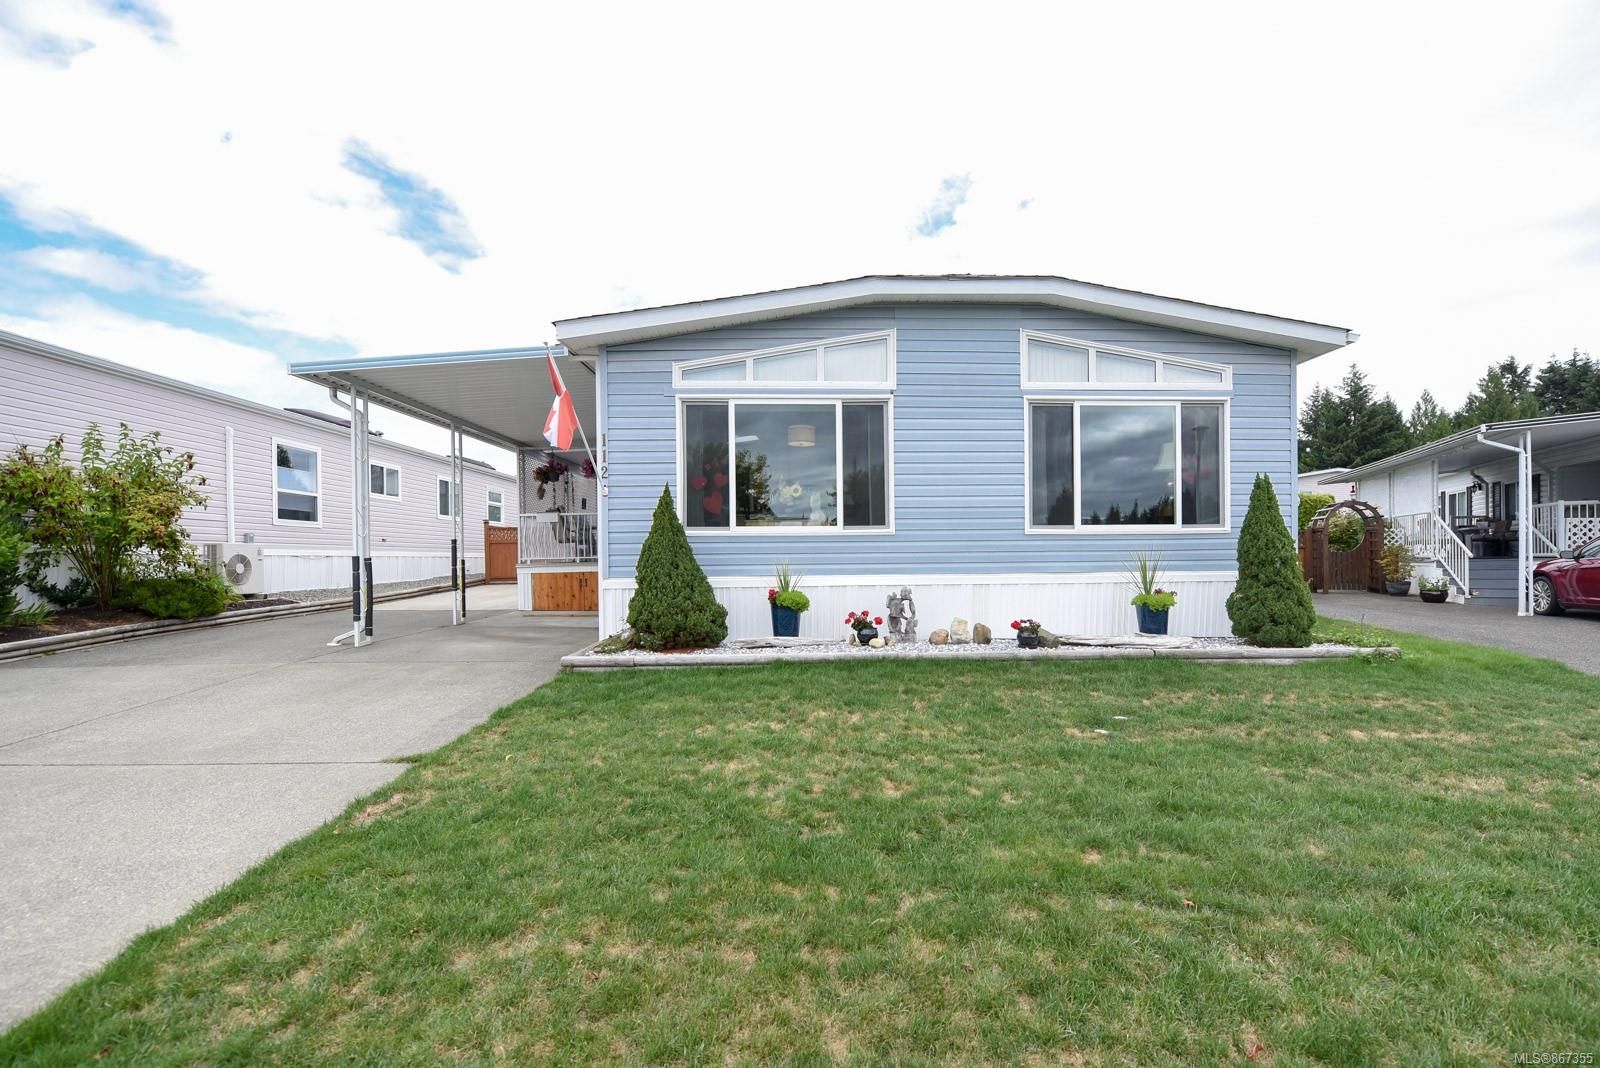 Main Photo: 112 4714 Muir Rd in Courtenay: CV Courtenay City Manufactured Home for sale (Comox Valley)  : MLS®# 867355